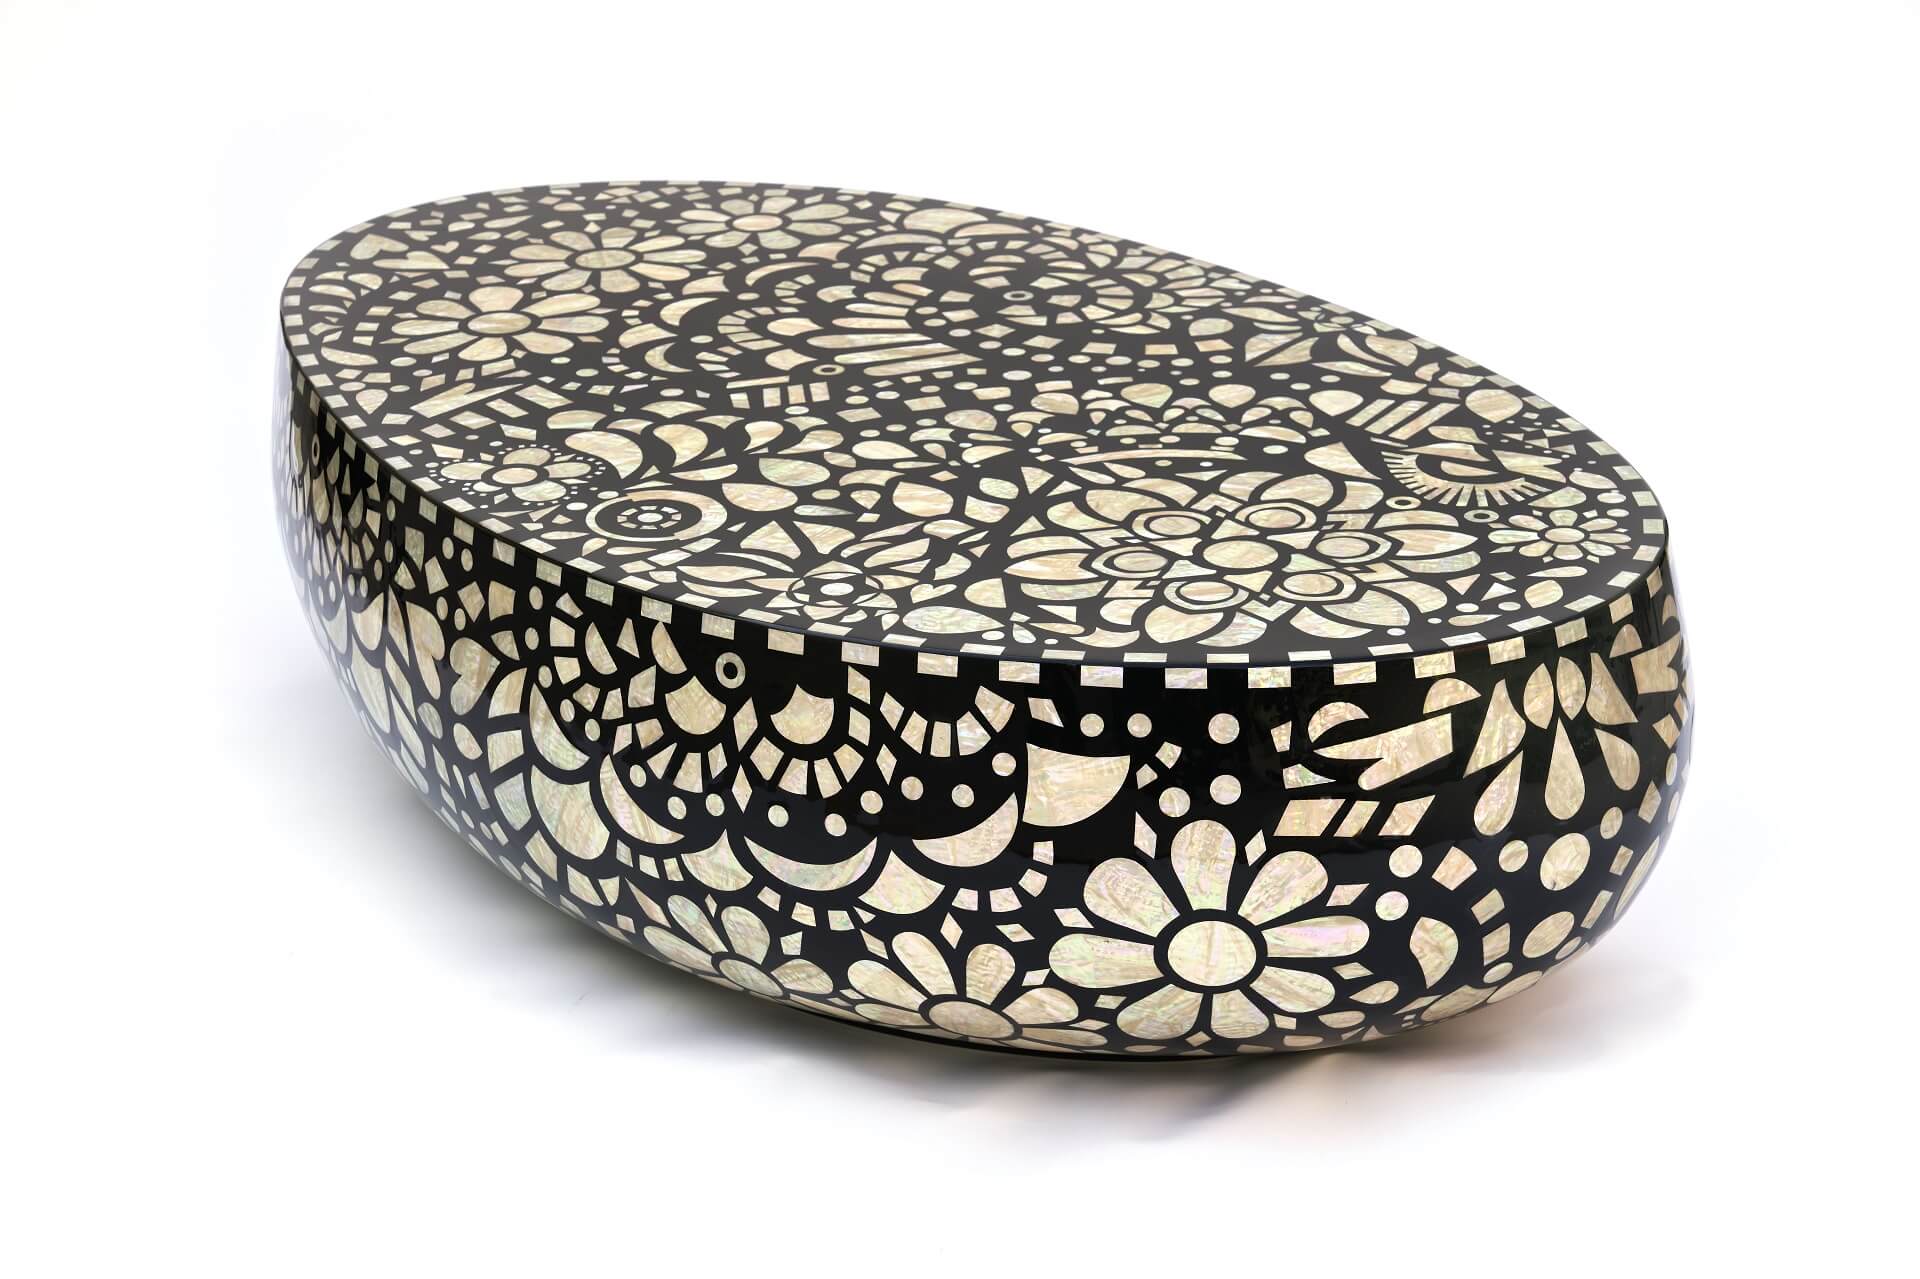 Mother-of-Pearl Tables_Fiore Fossile_Marcel Wanders